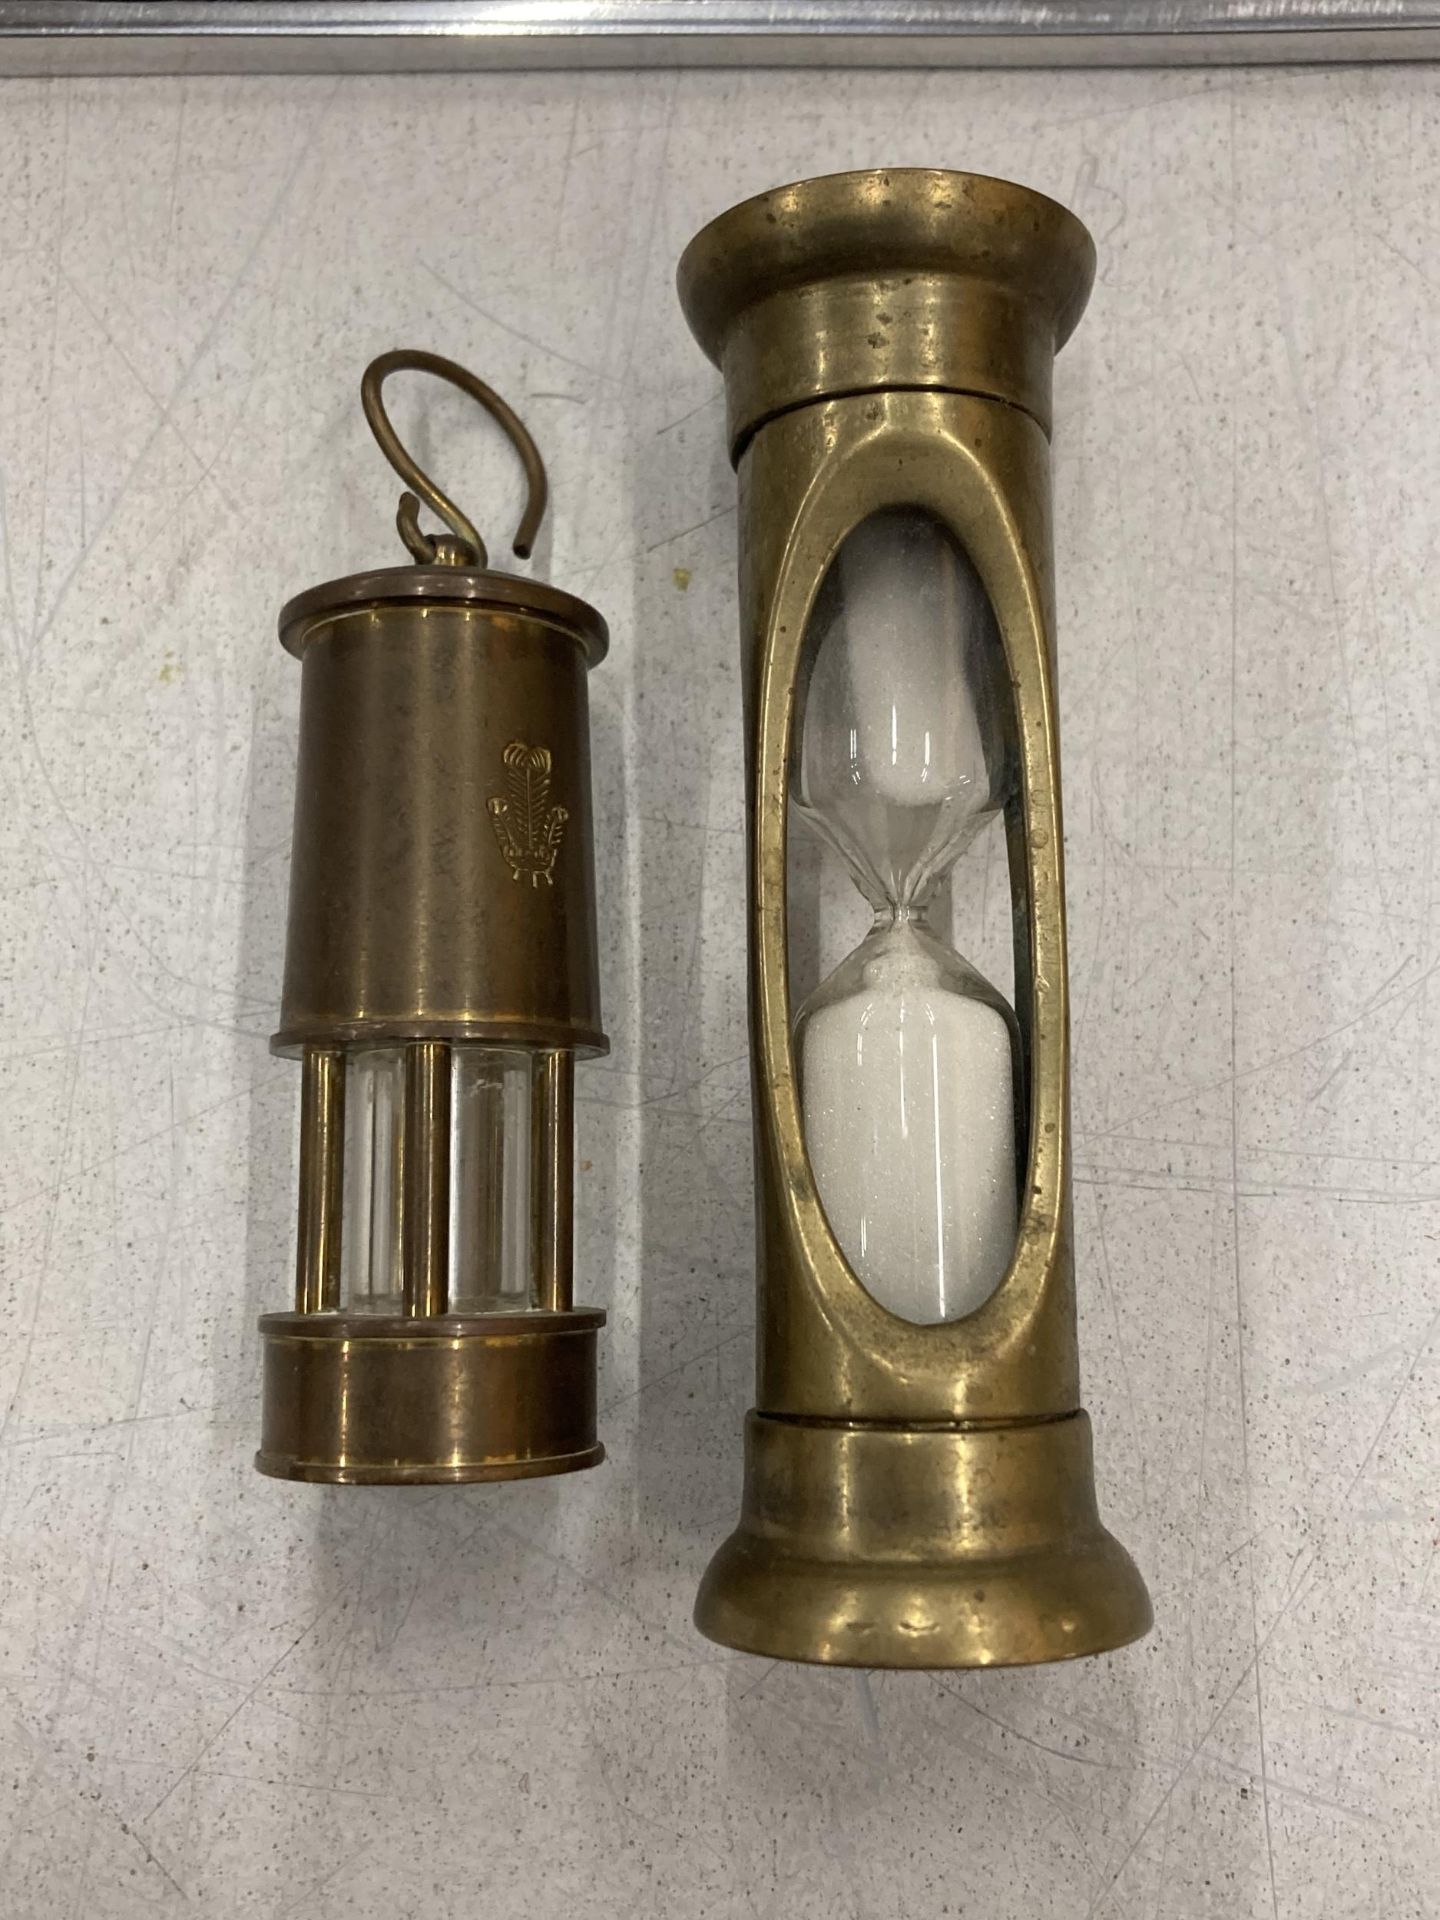 TWO VINTAGE BRASS ITEMS - SMALL MINERS LAMP AND SAND TIMER